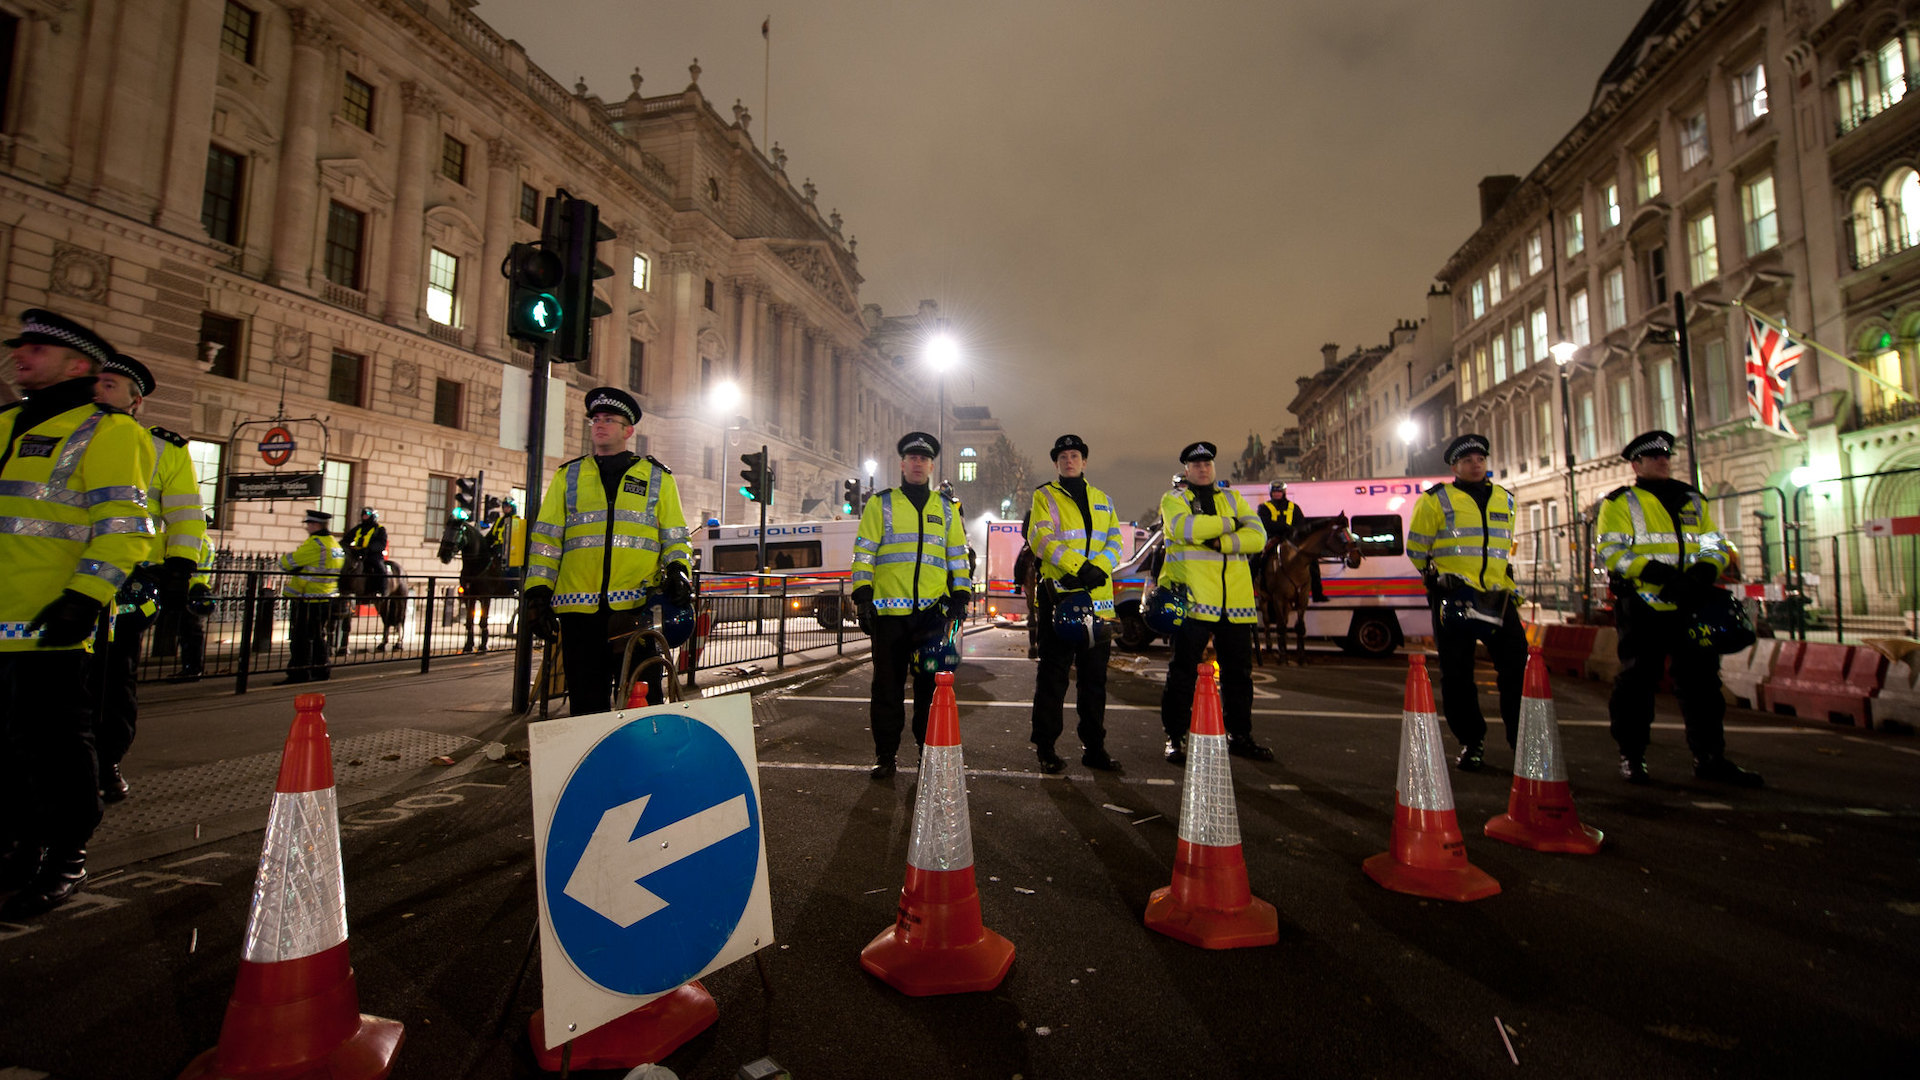 The policing bill could see protests shut down if deemed too disruptive